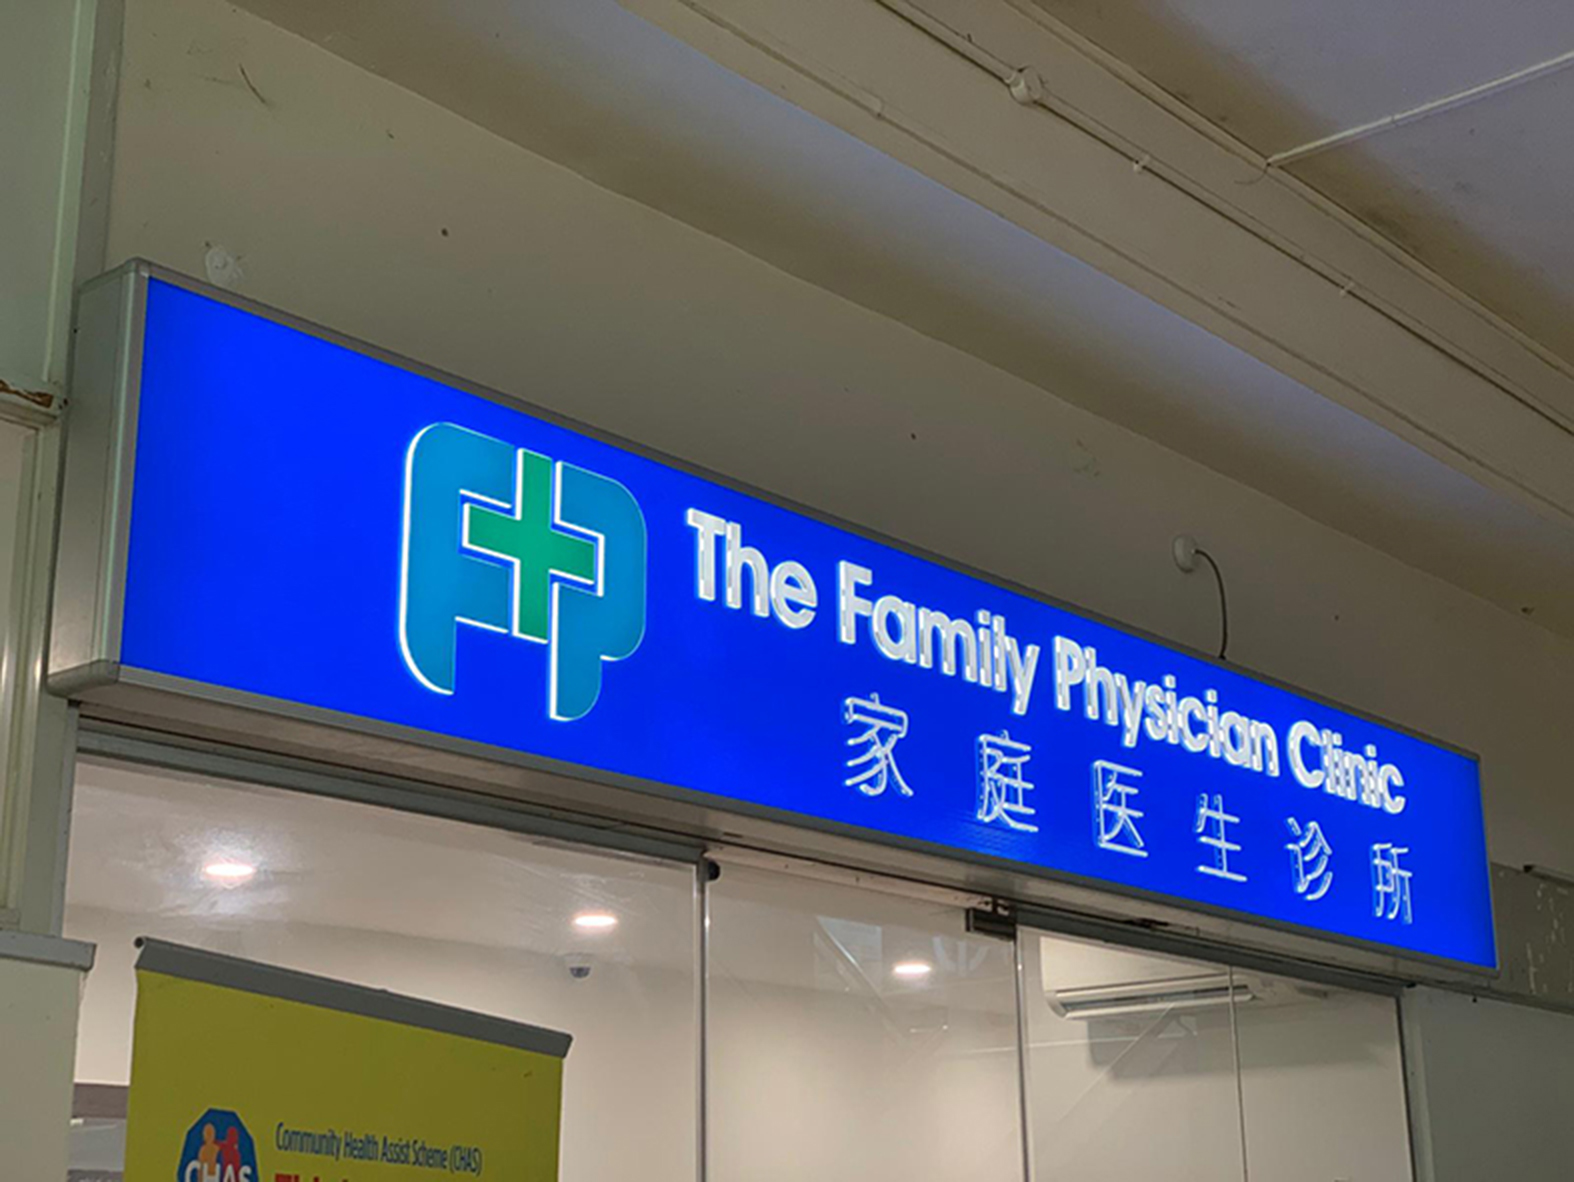 THE FAMILY PHYSICIAN CLINIC